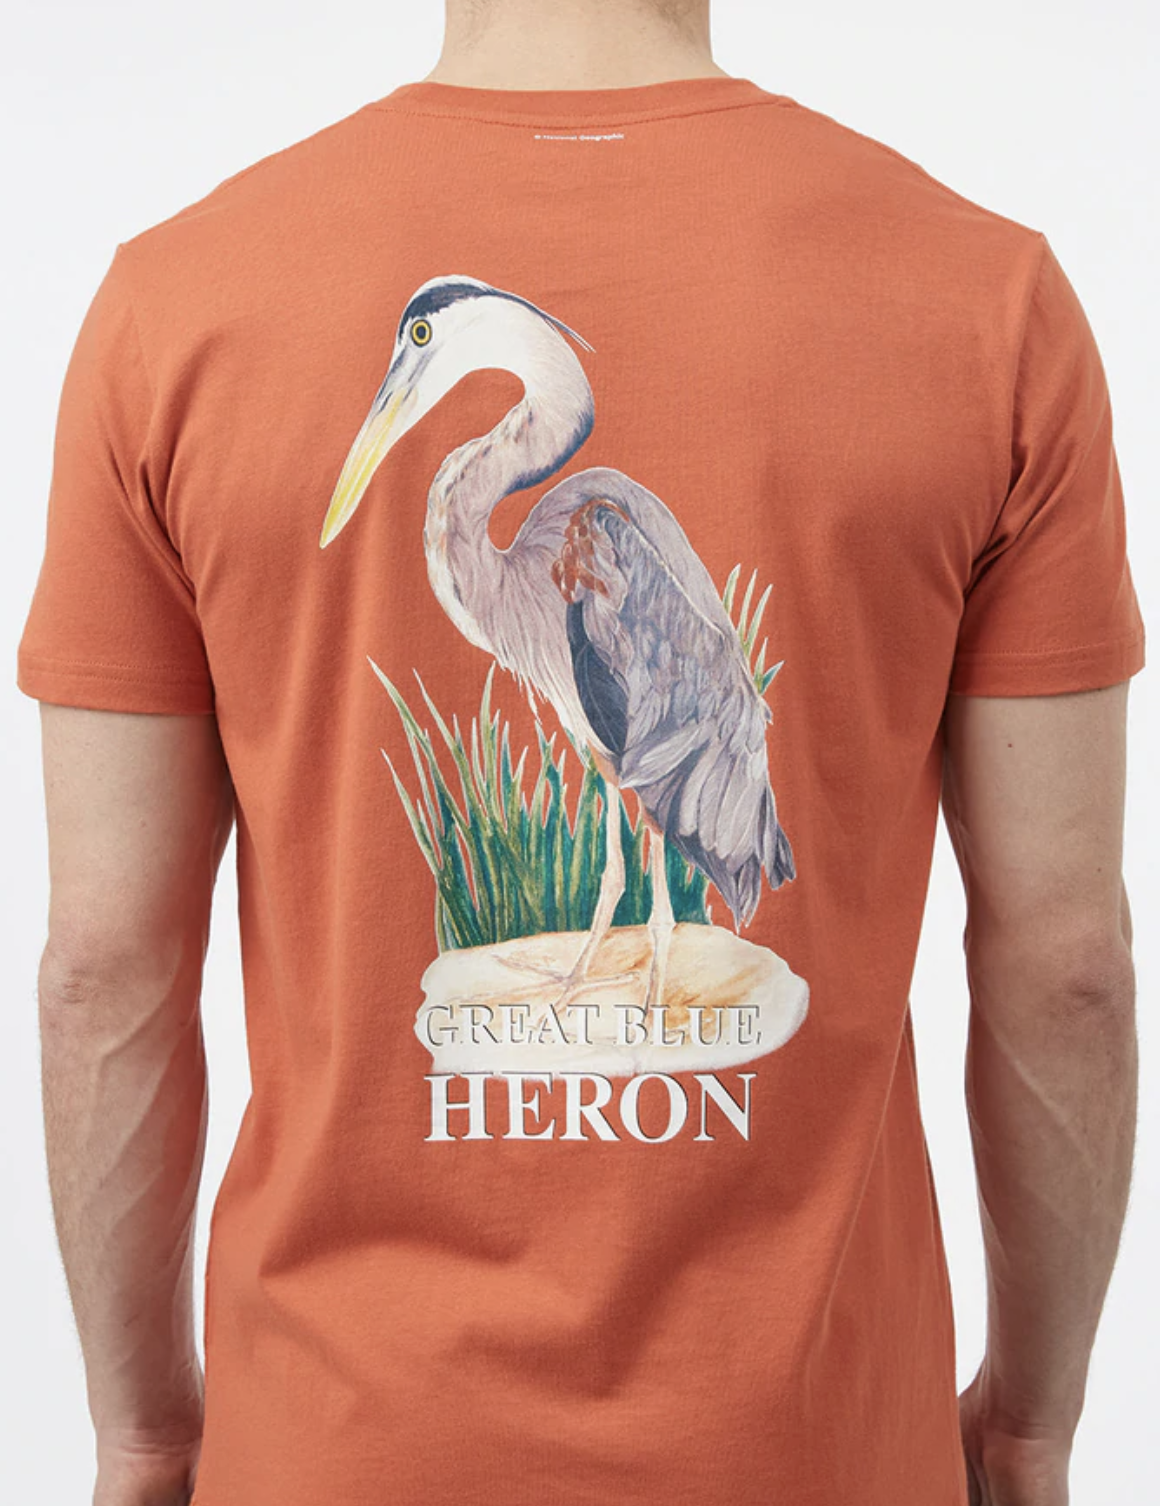 The back of the shirt to show the blue heron design